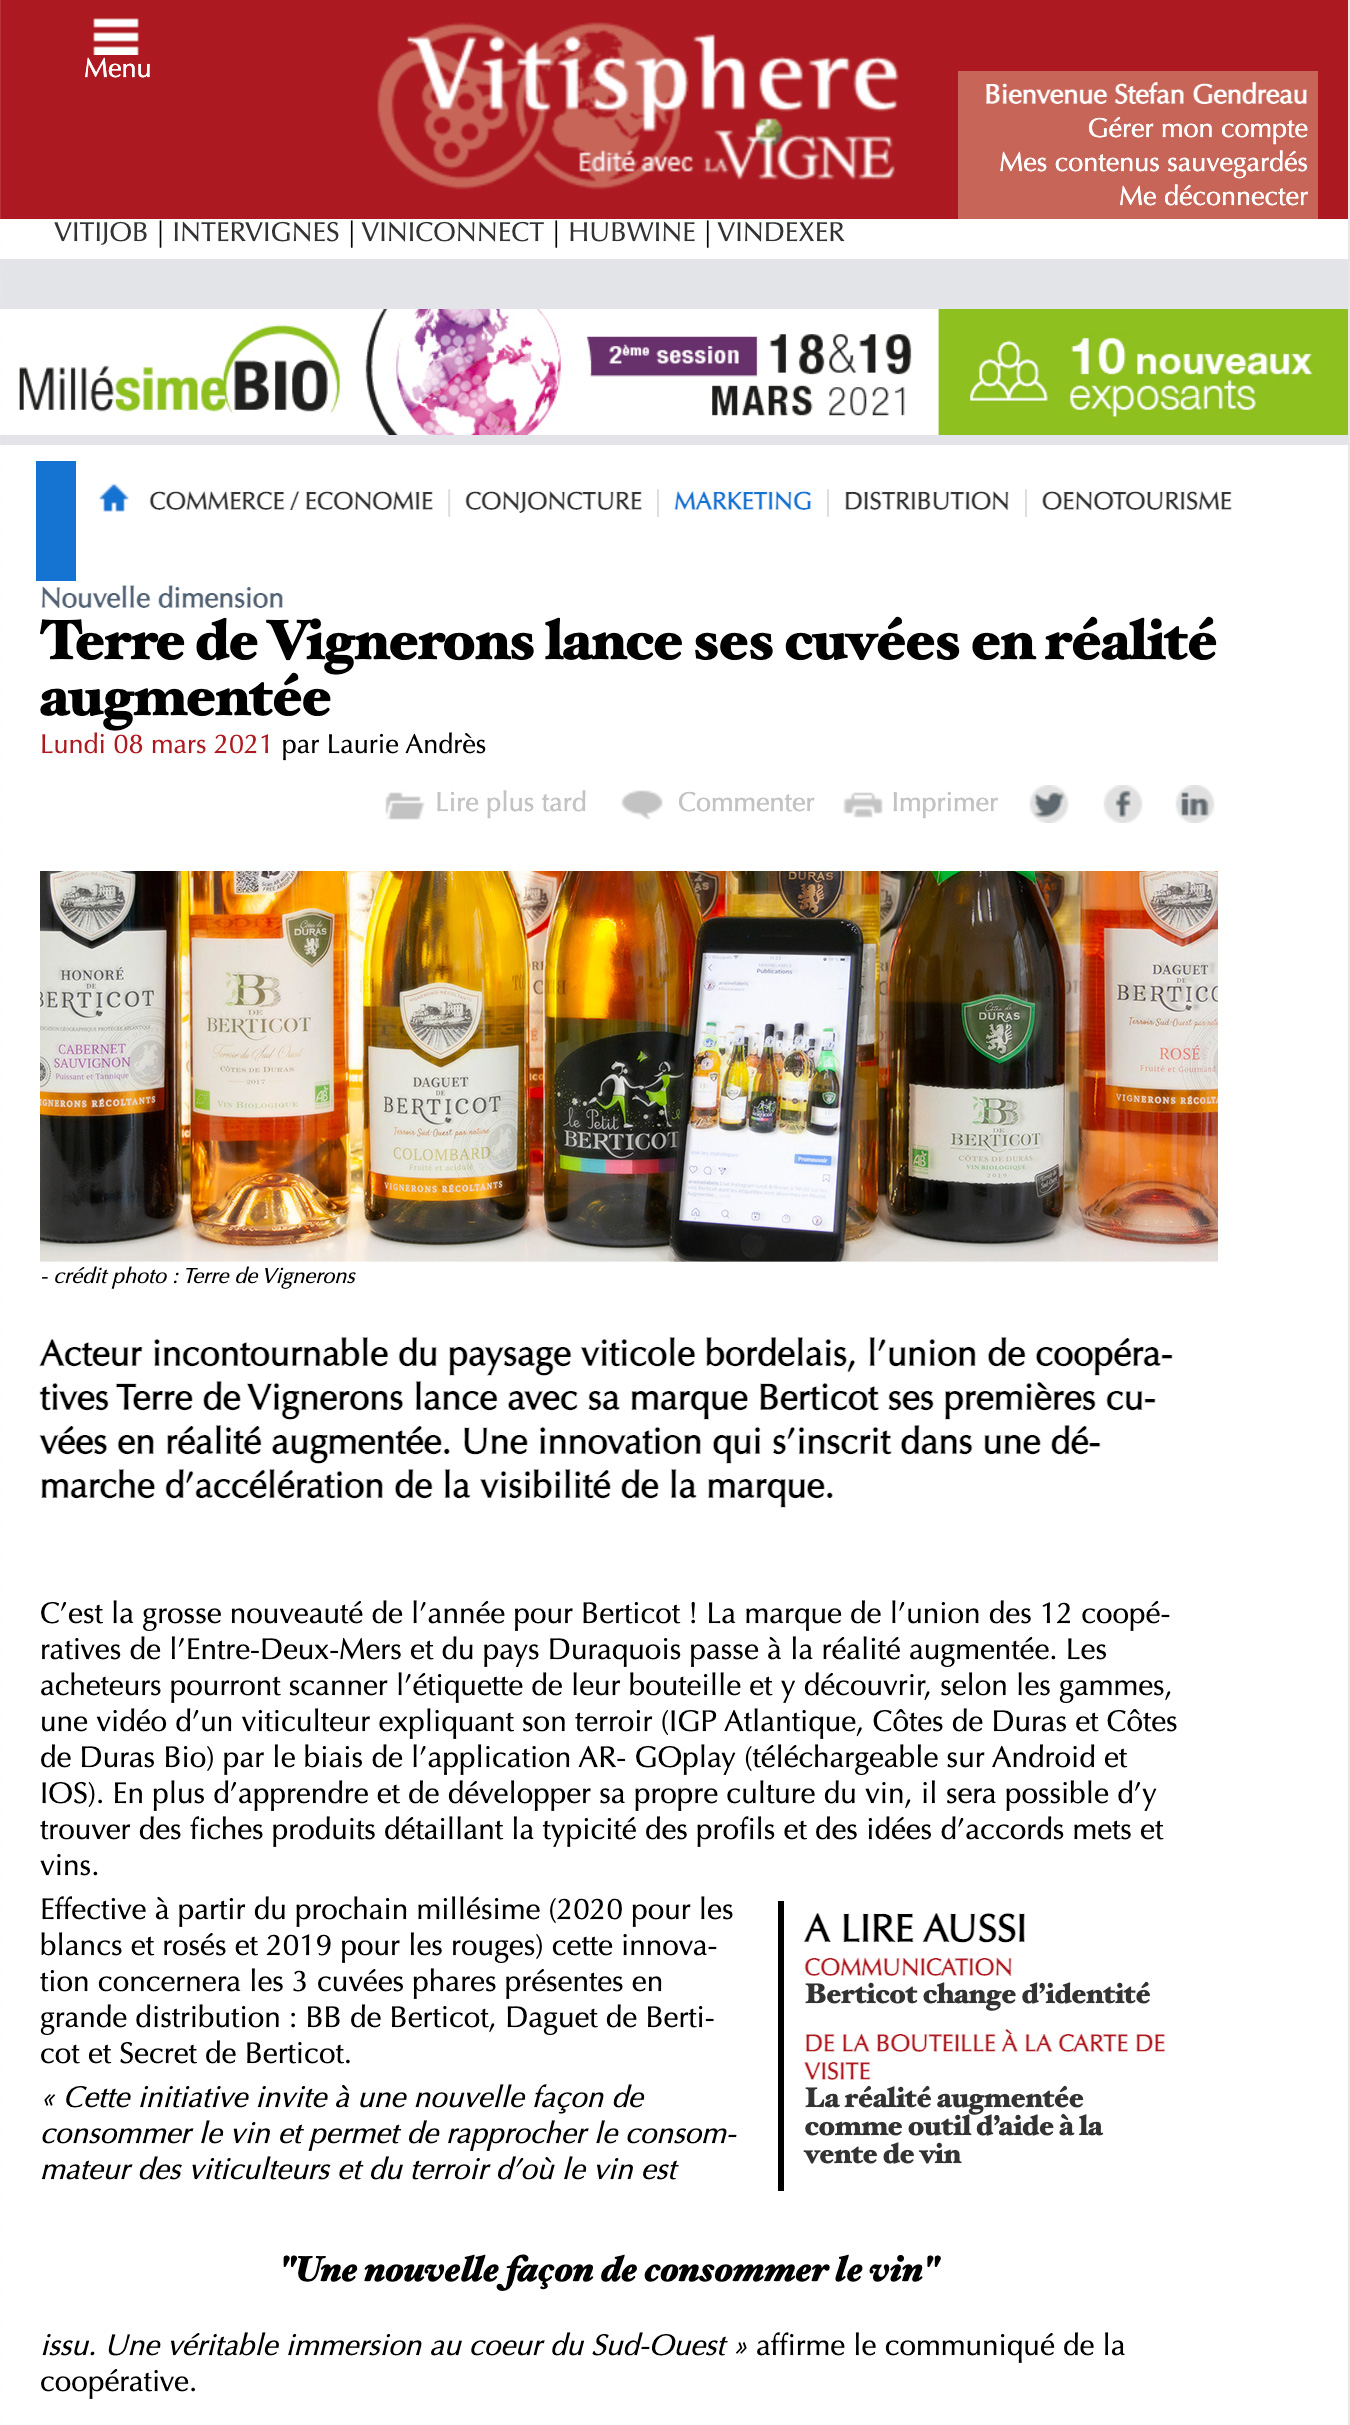 Vitisphère website and Terre de Vignerons in Augmented Reality